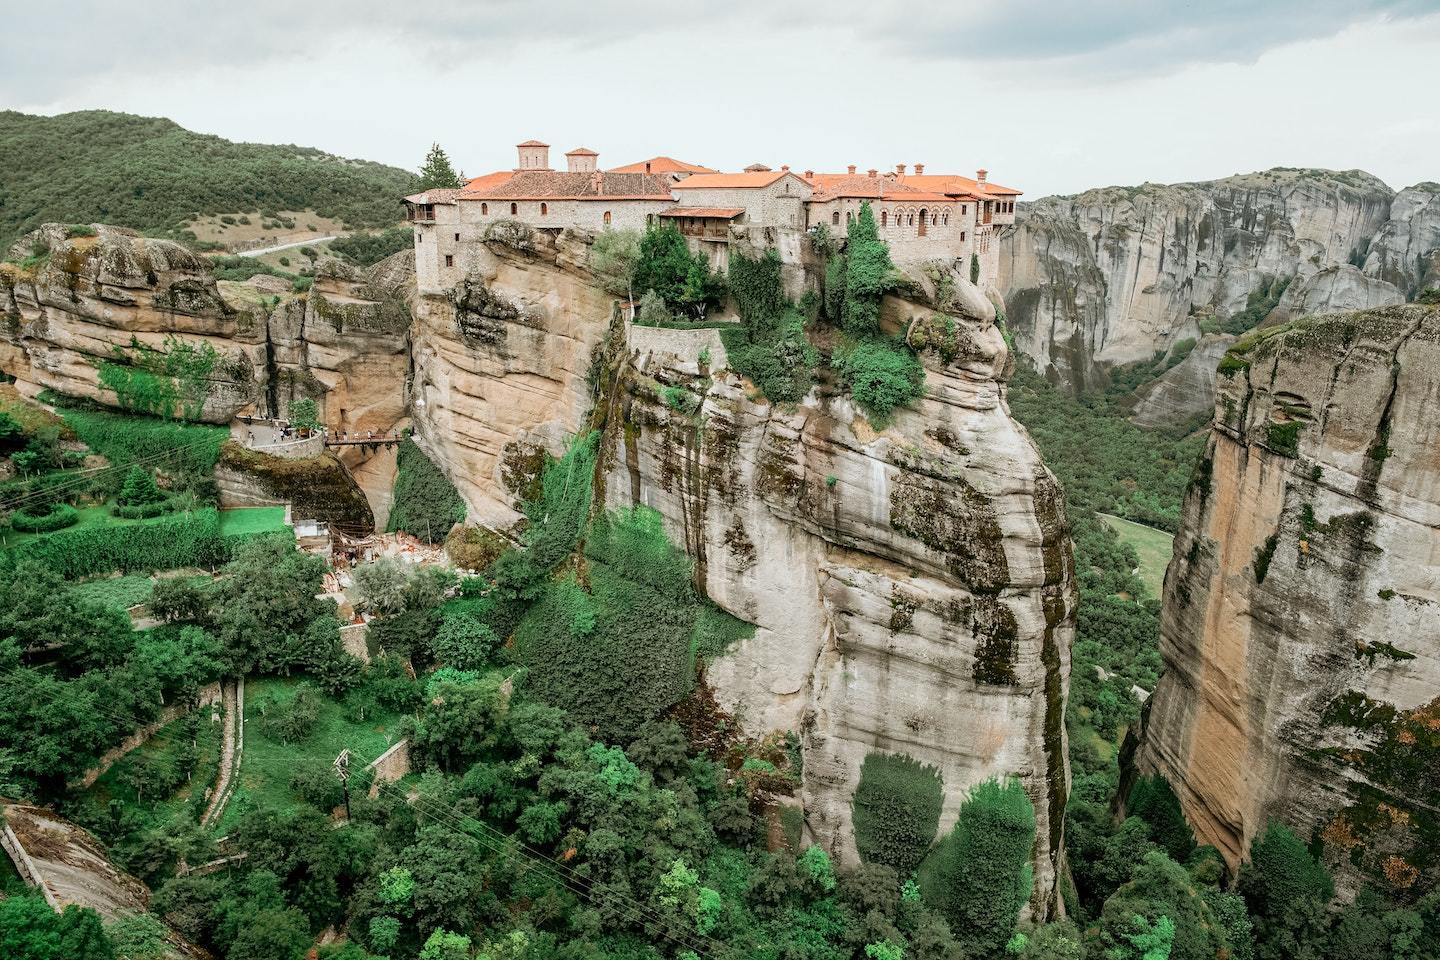 Monastery sitting on top of a giant cliff in Meteora, Greece